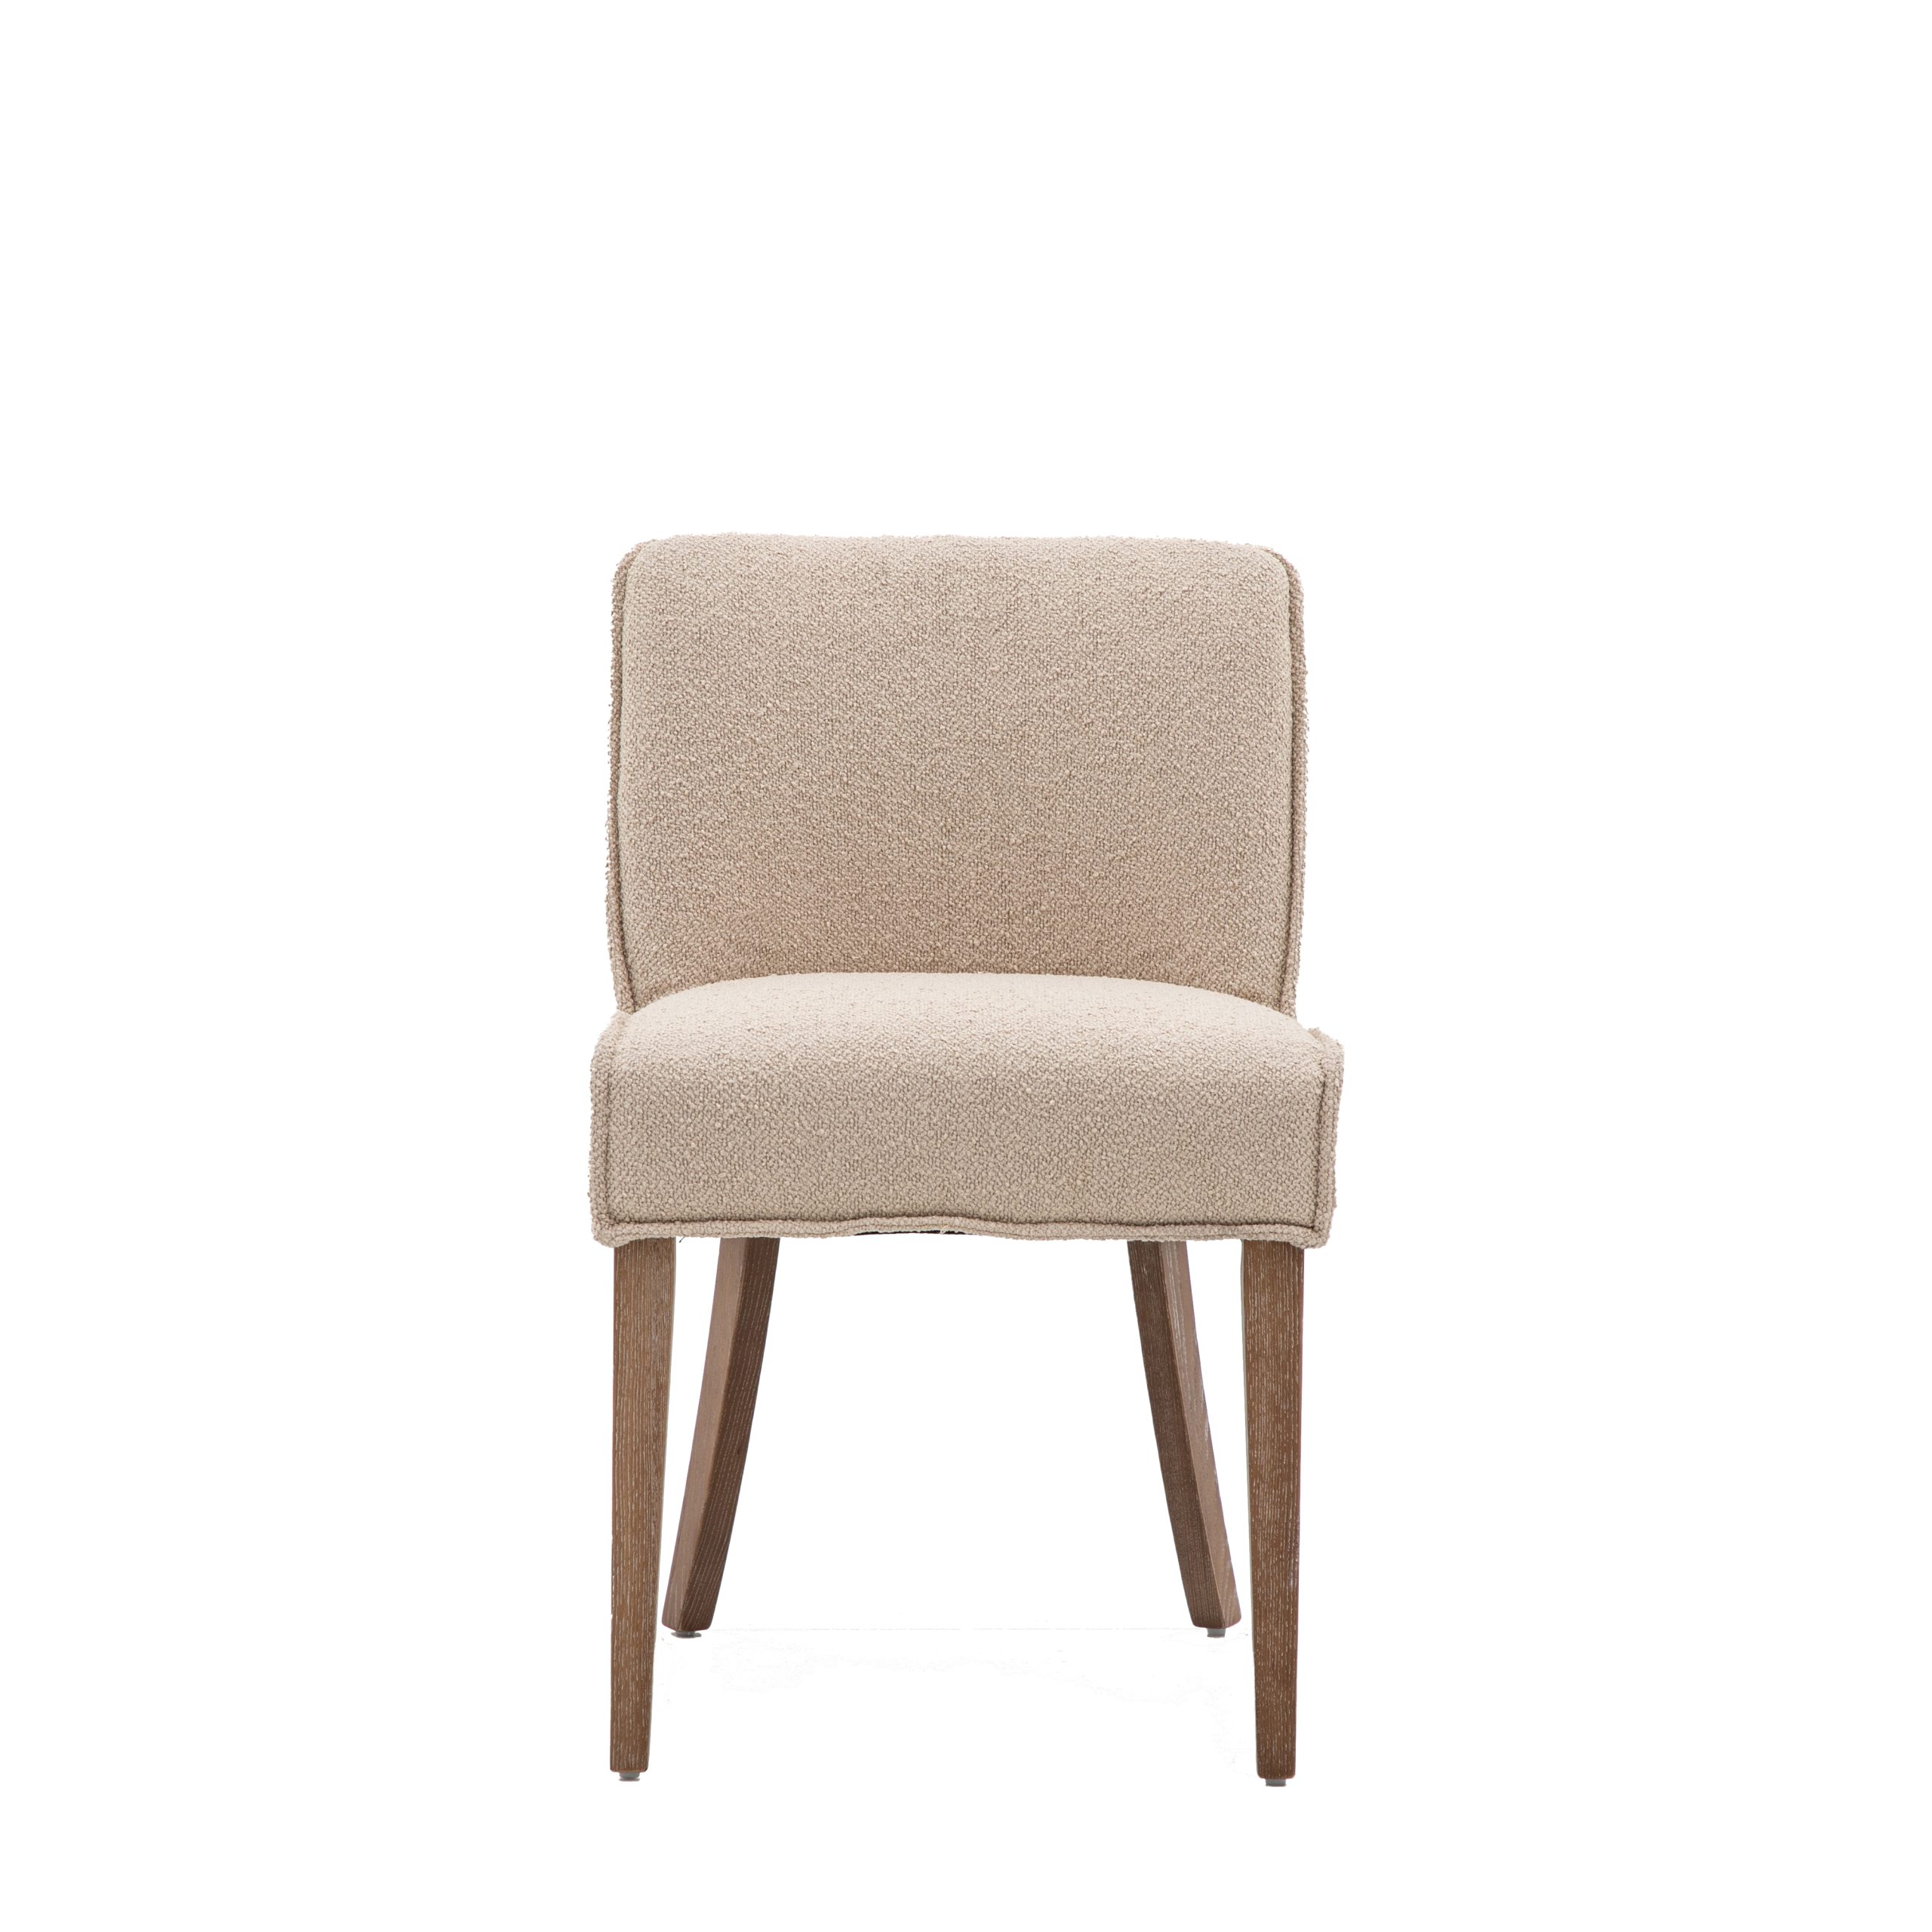 Gallery Direct Tarnby Chair Taupe (Set of 2)